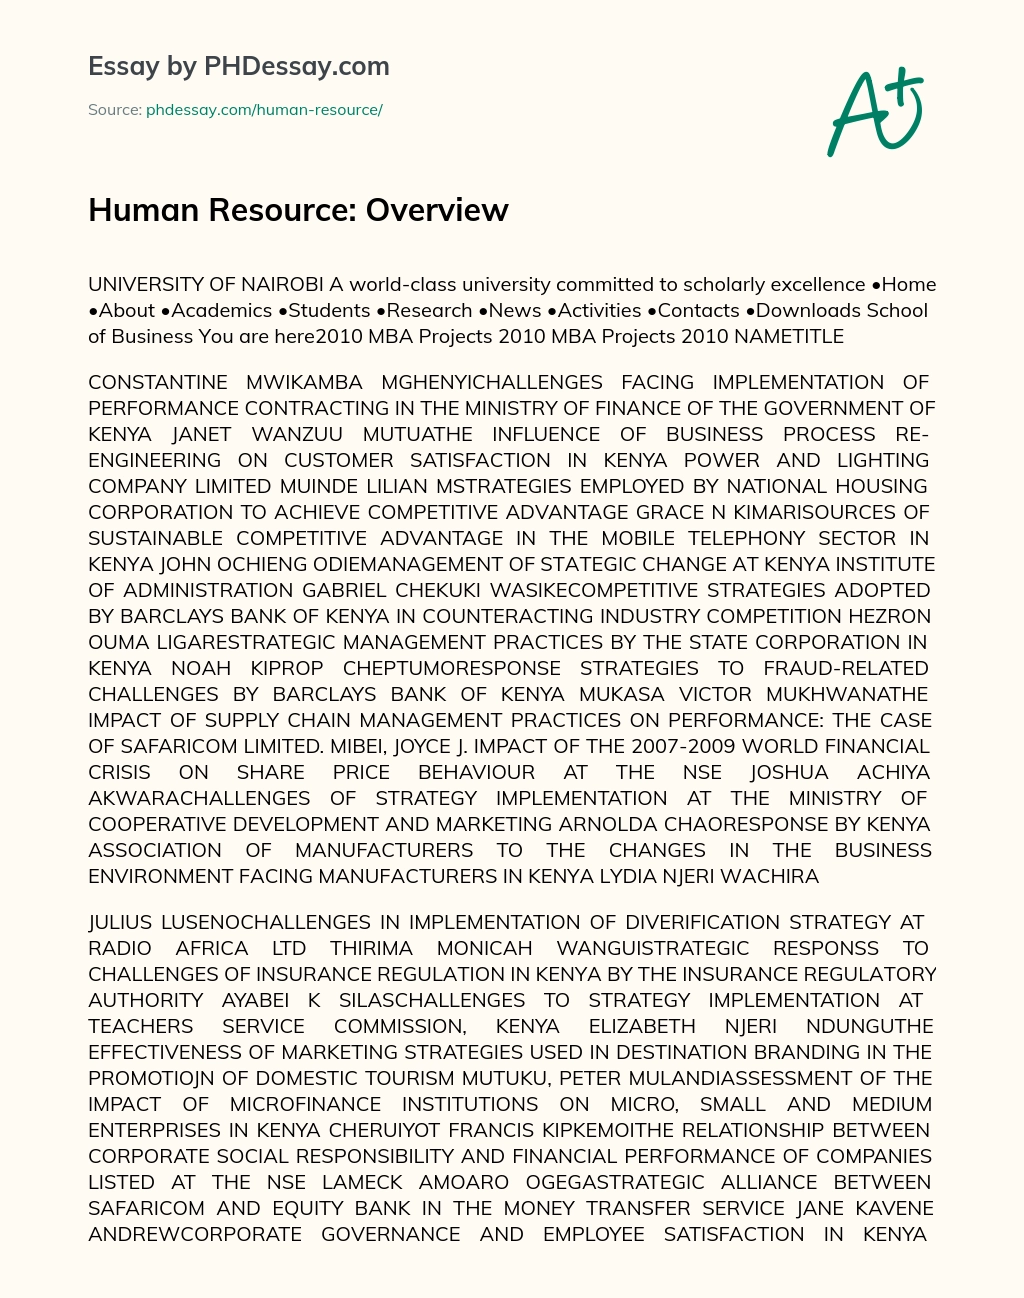 Human Resource: Overview essay